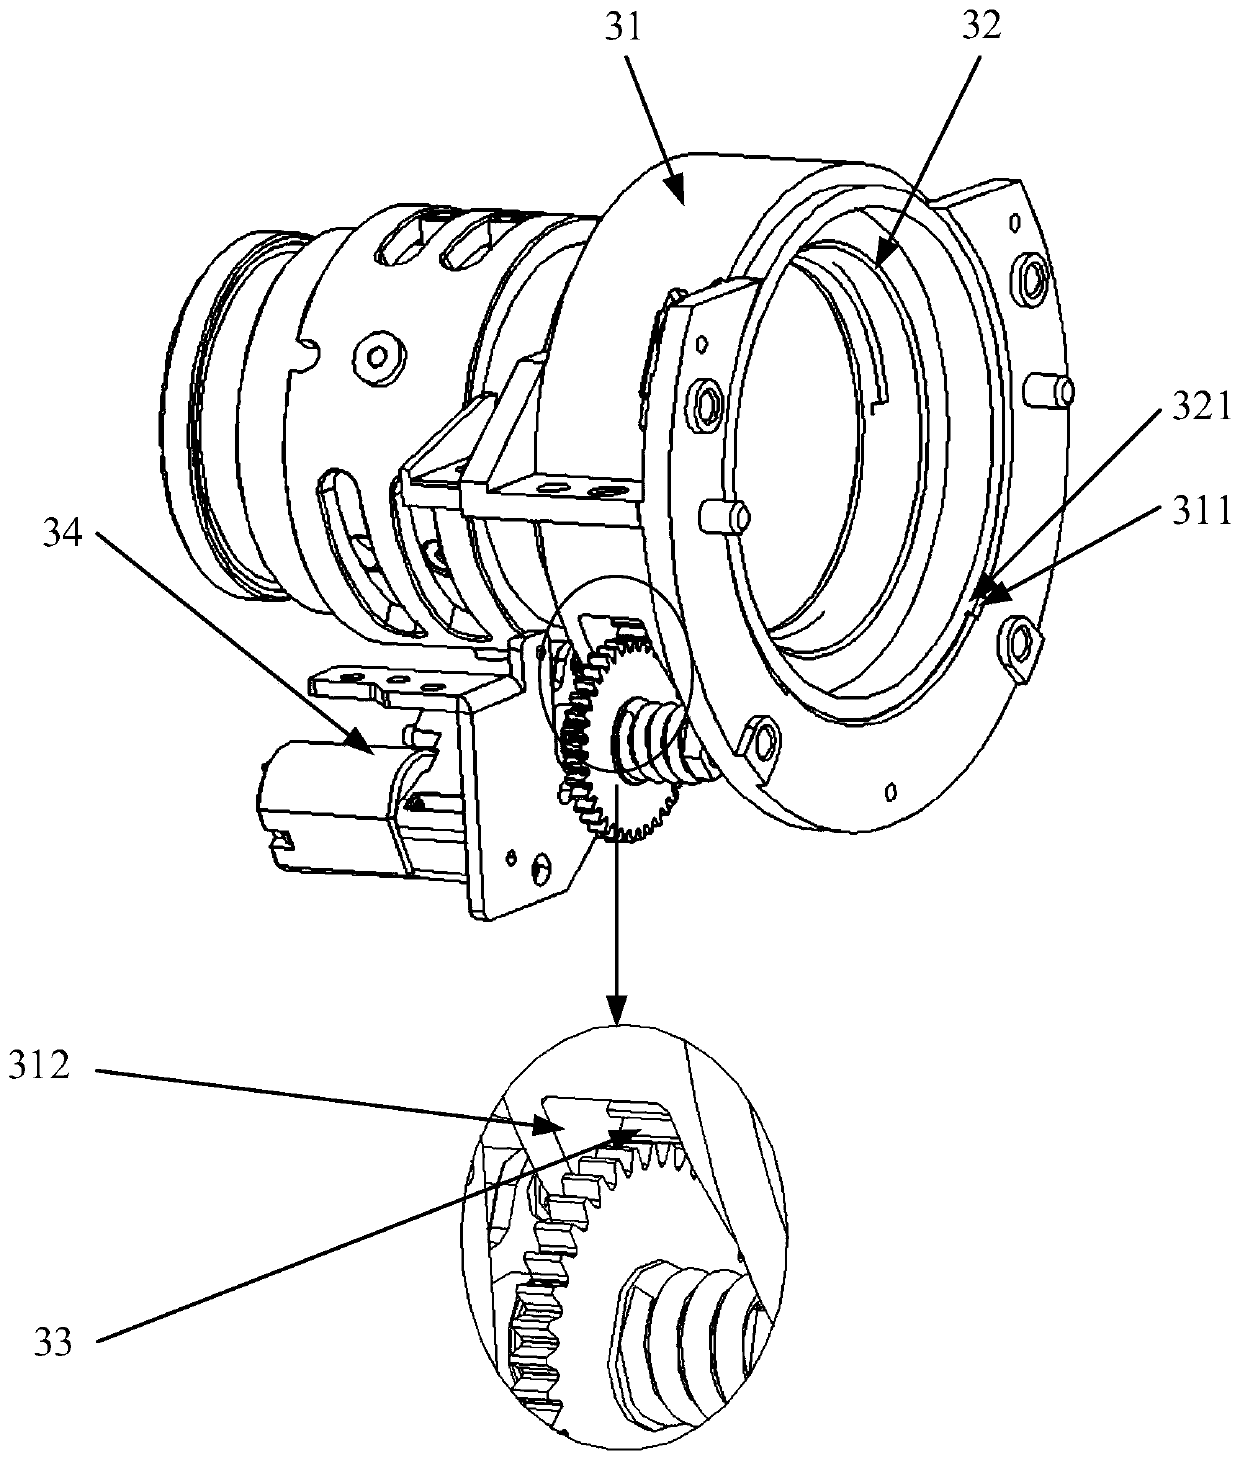 Projection device and lens